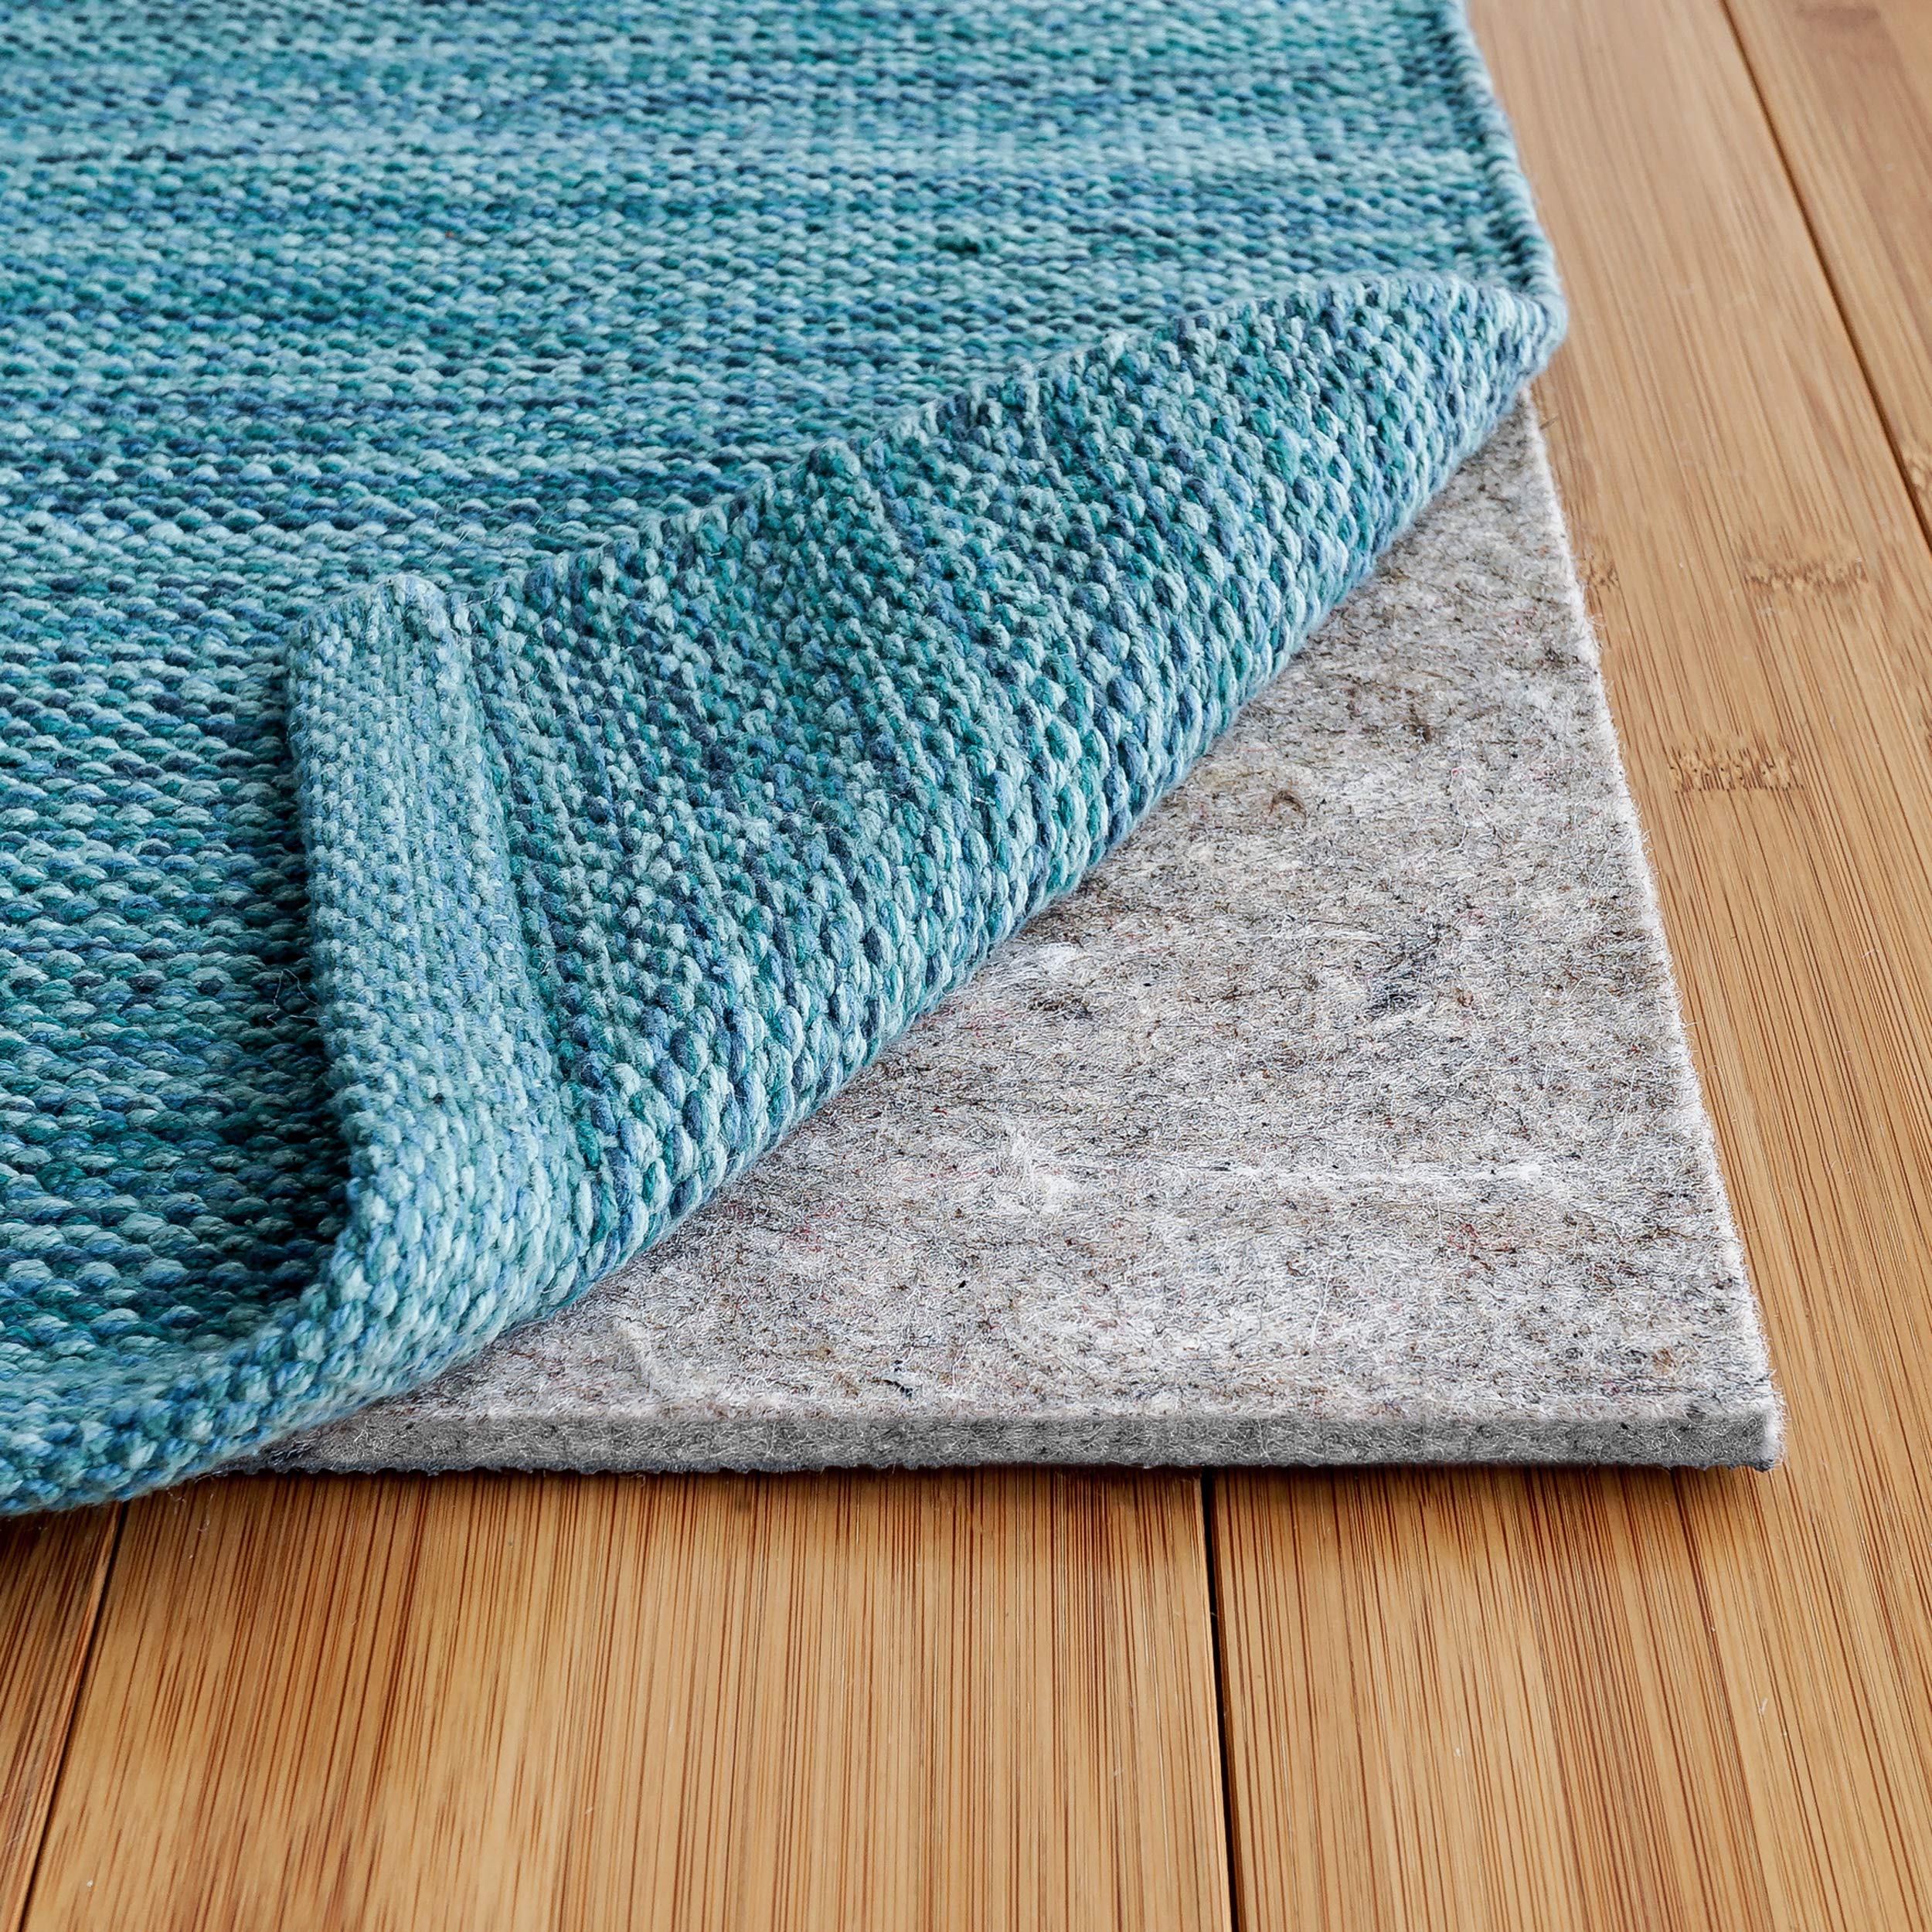 RUGPADUSA - Basics - 4'x6' - 1/4" Thick - Felt + Rubber - Non-Slip Rug Pad - Cushioning Felt for Added Comfort - Safe for All Floors and Finishes